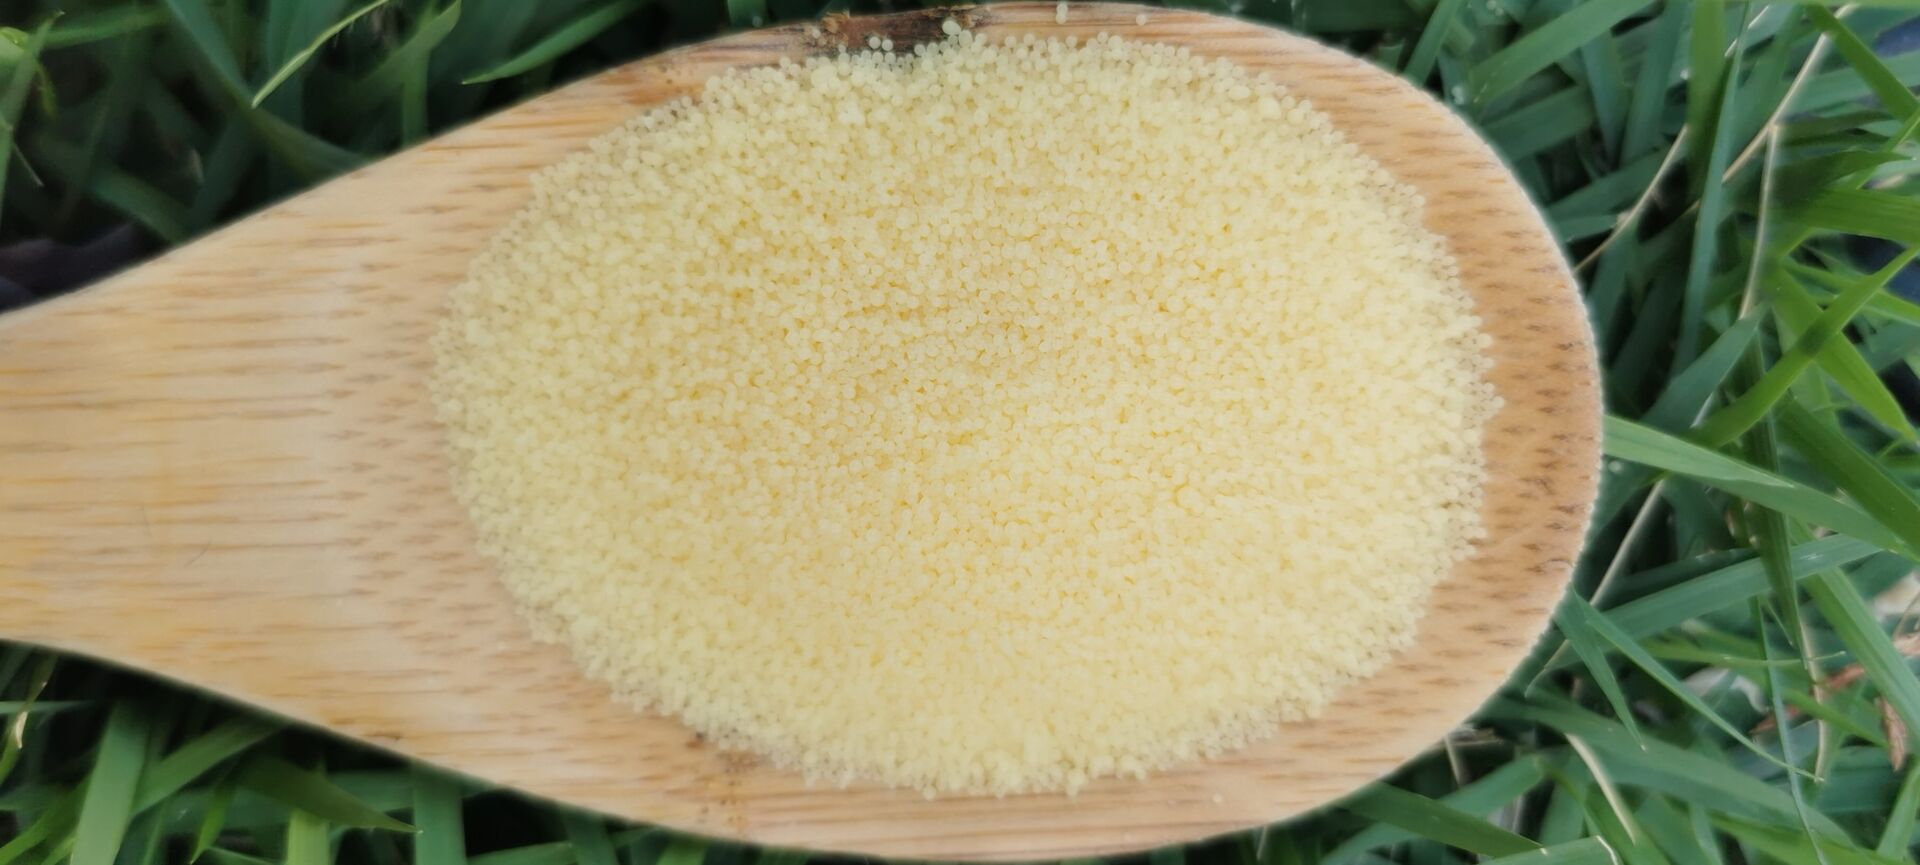 The Benefits of Organic Candelilla Wax for Cosmetics and Personal